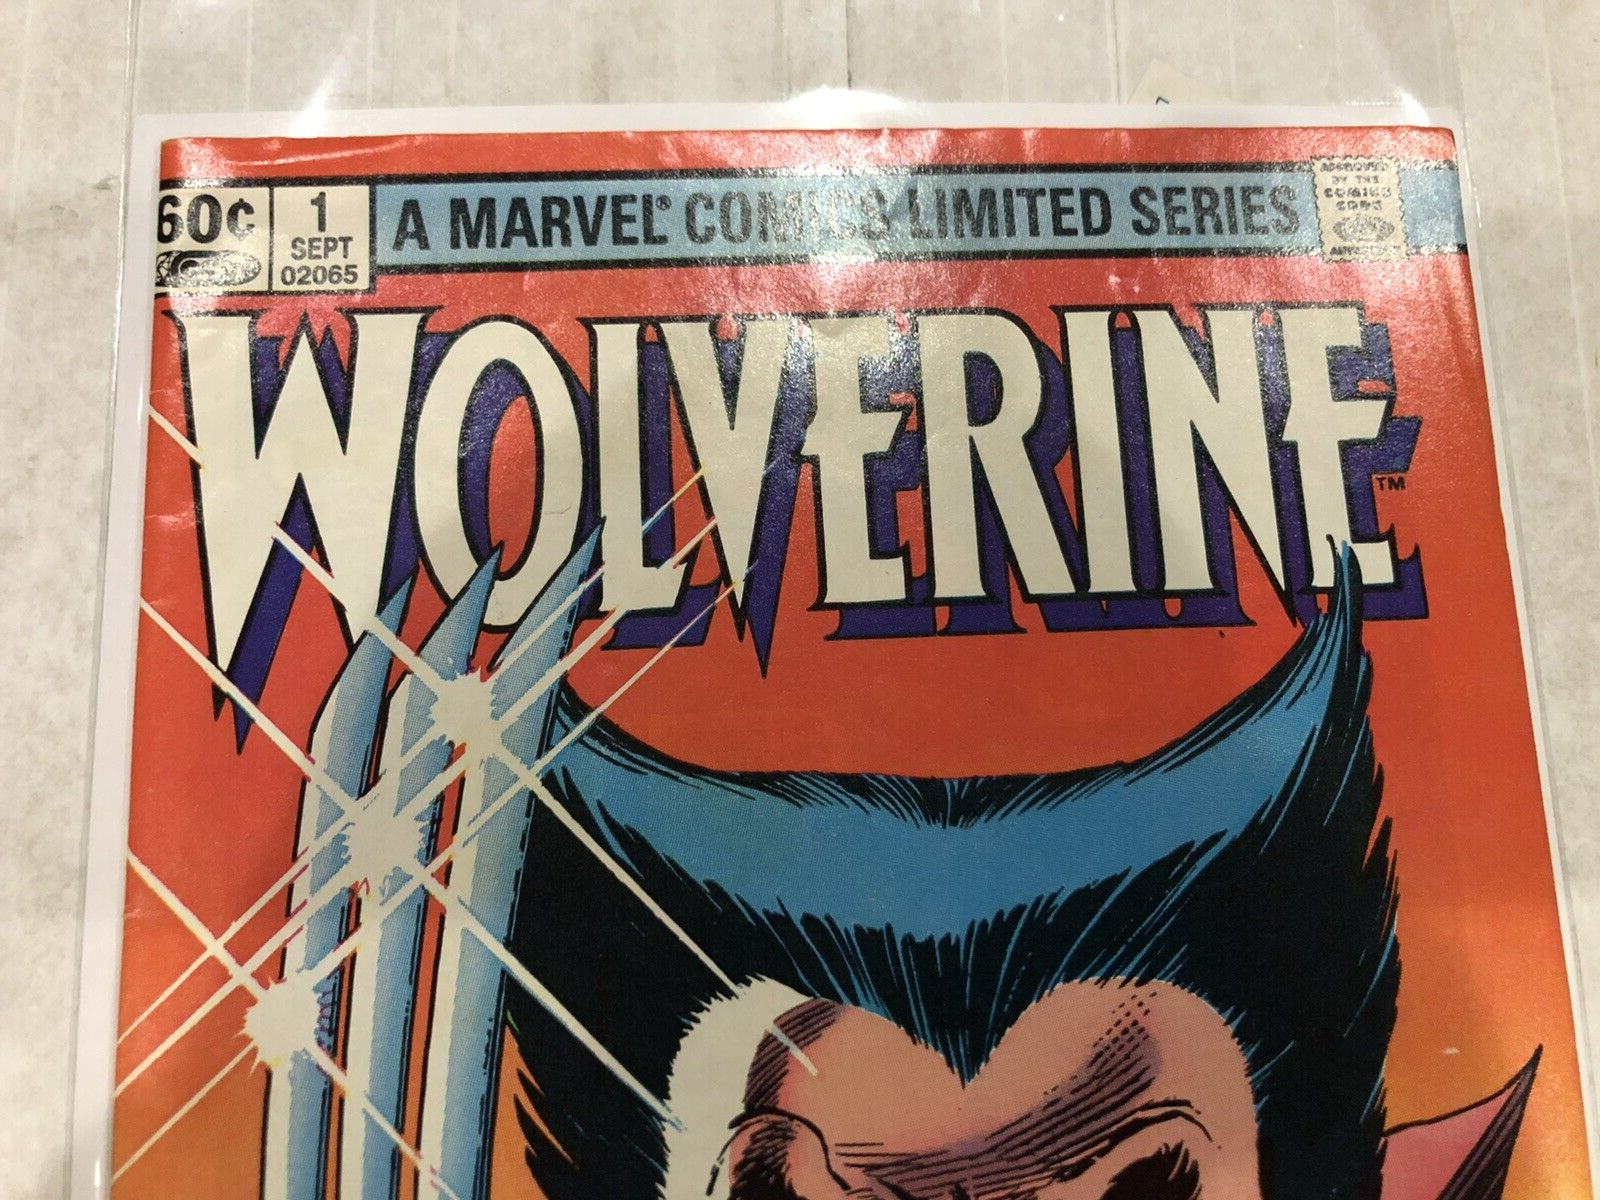 WOLVERINE #1 MARVEL 1982 VOL 1 FIRST SOLO TITLE 